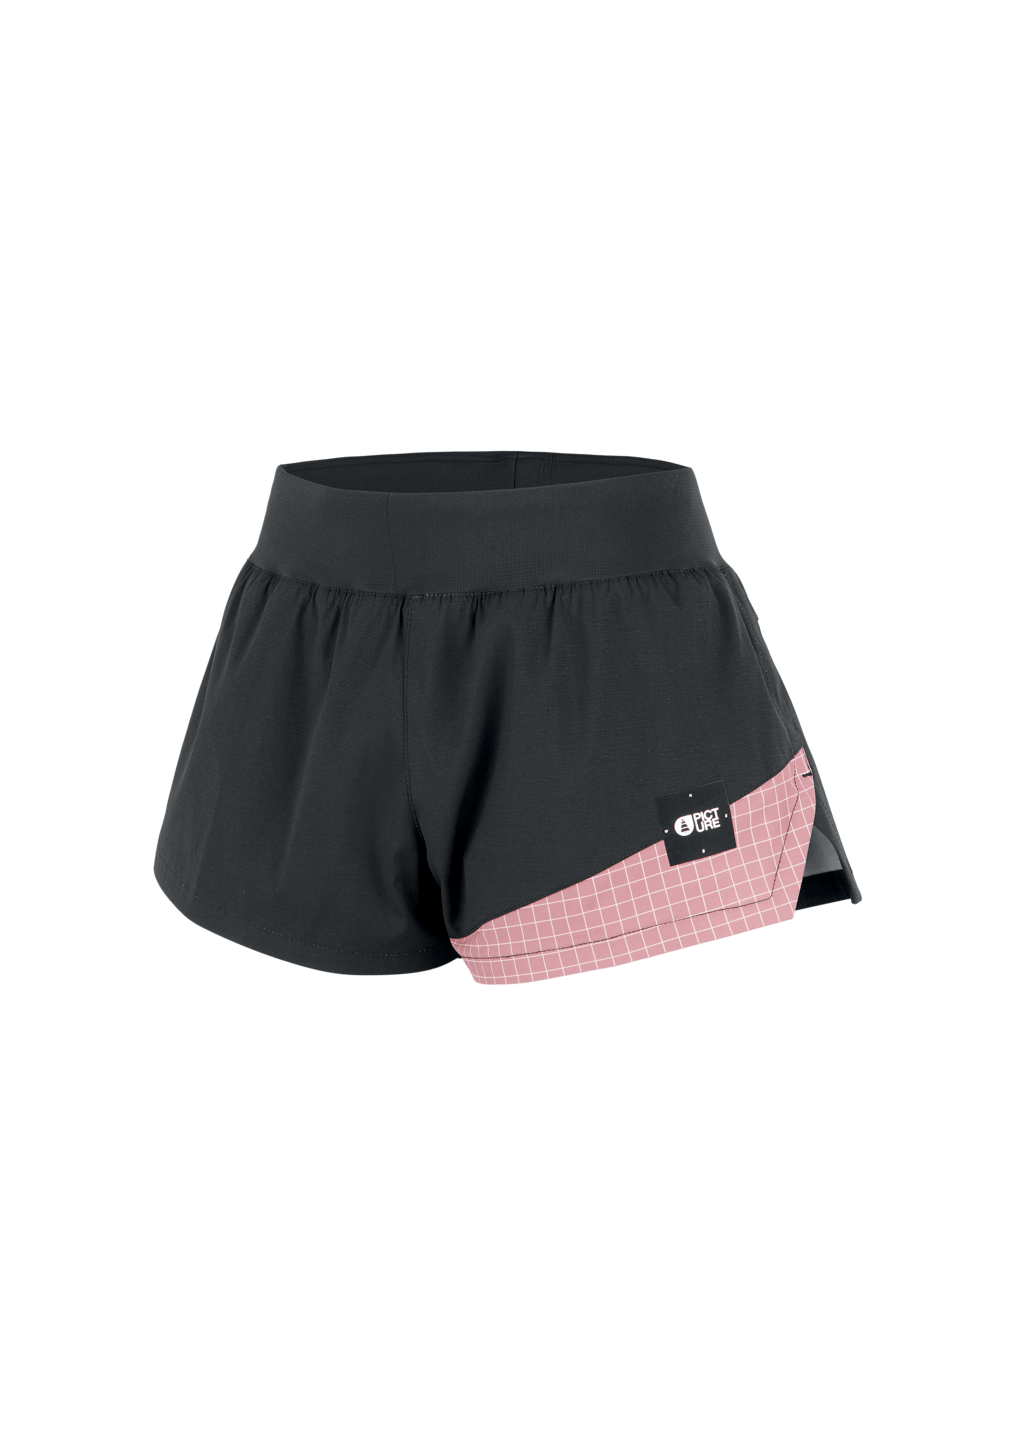 Picture Organic W's Arane Shorts - Recycled Polyester Black Ash Rose Pants